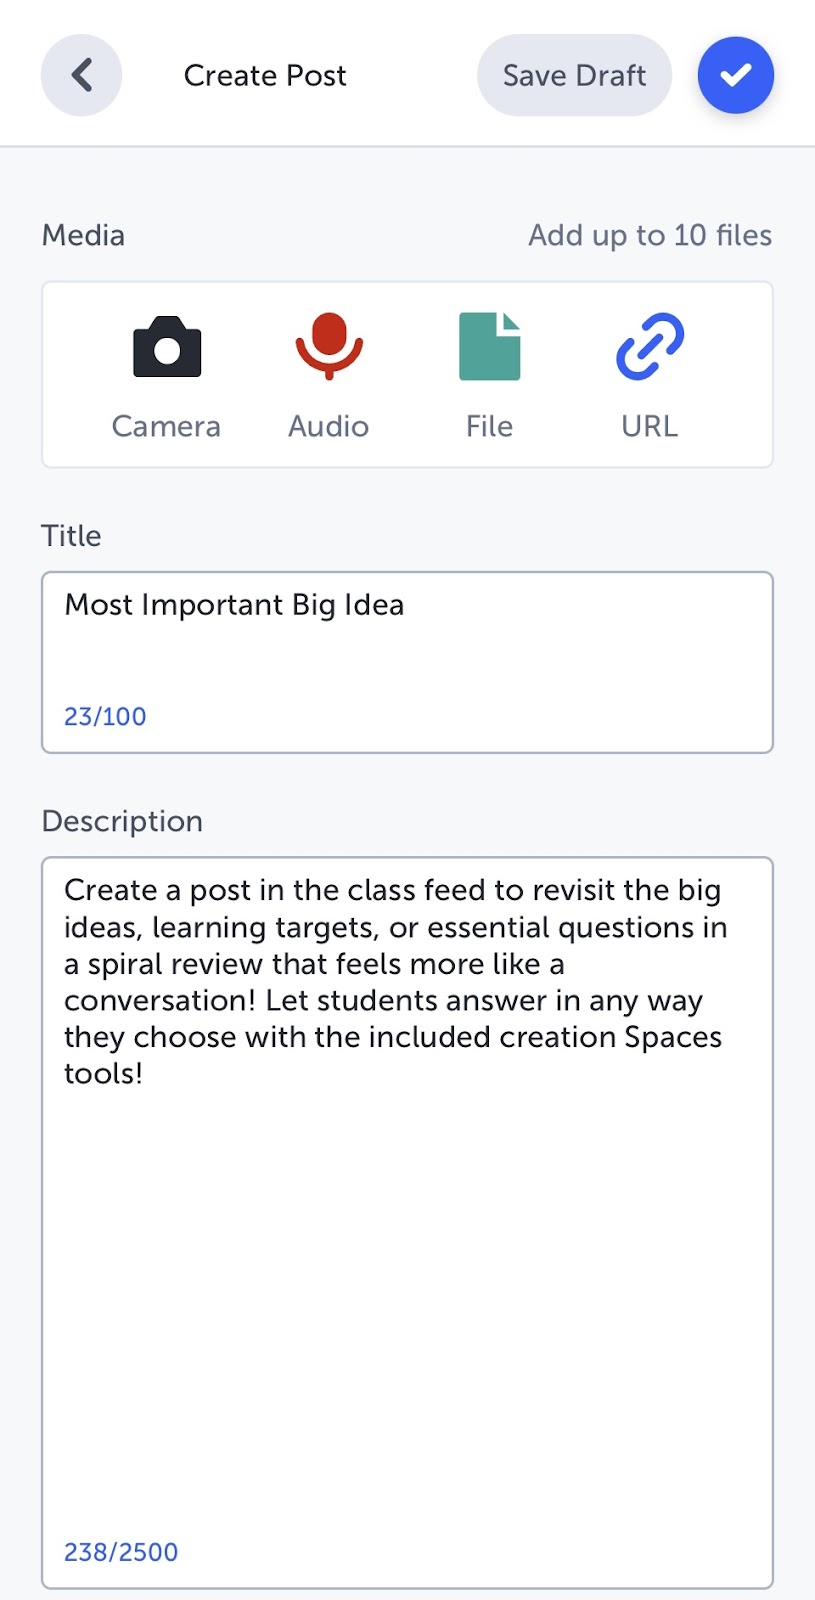 Create and connect learning targets in a refreshing way for your students to reivew.